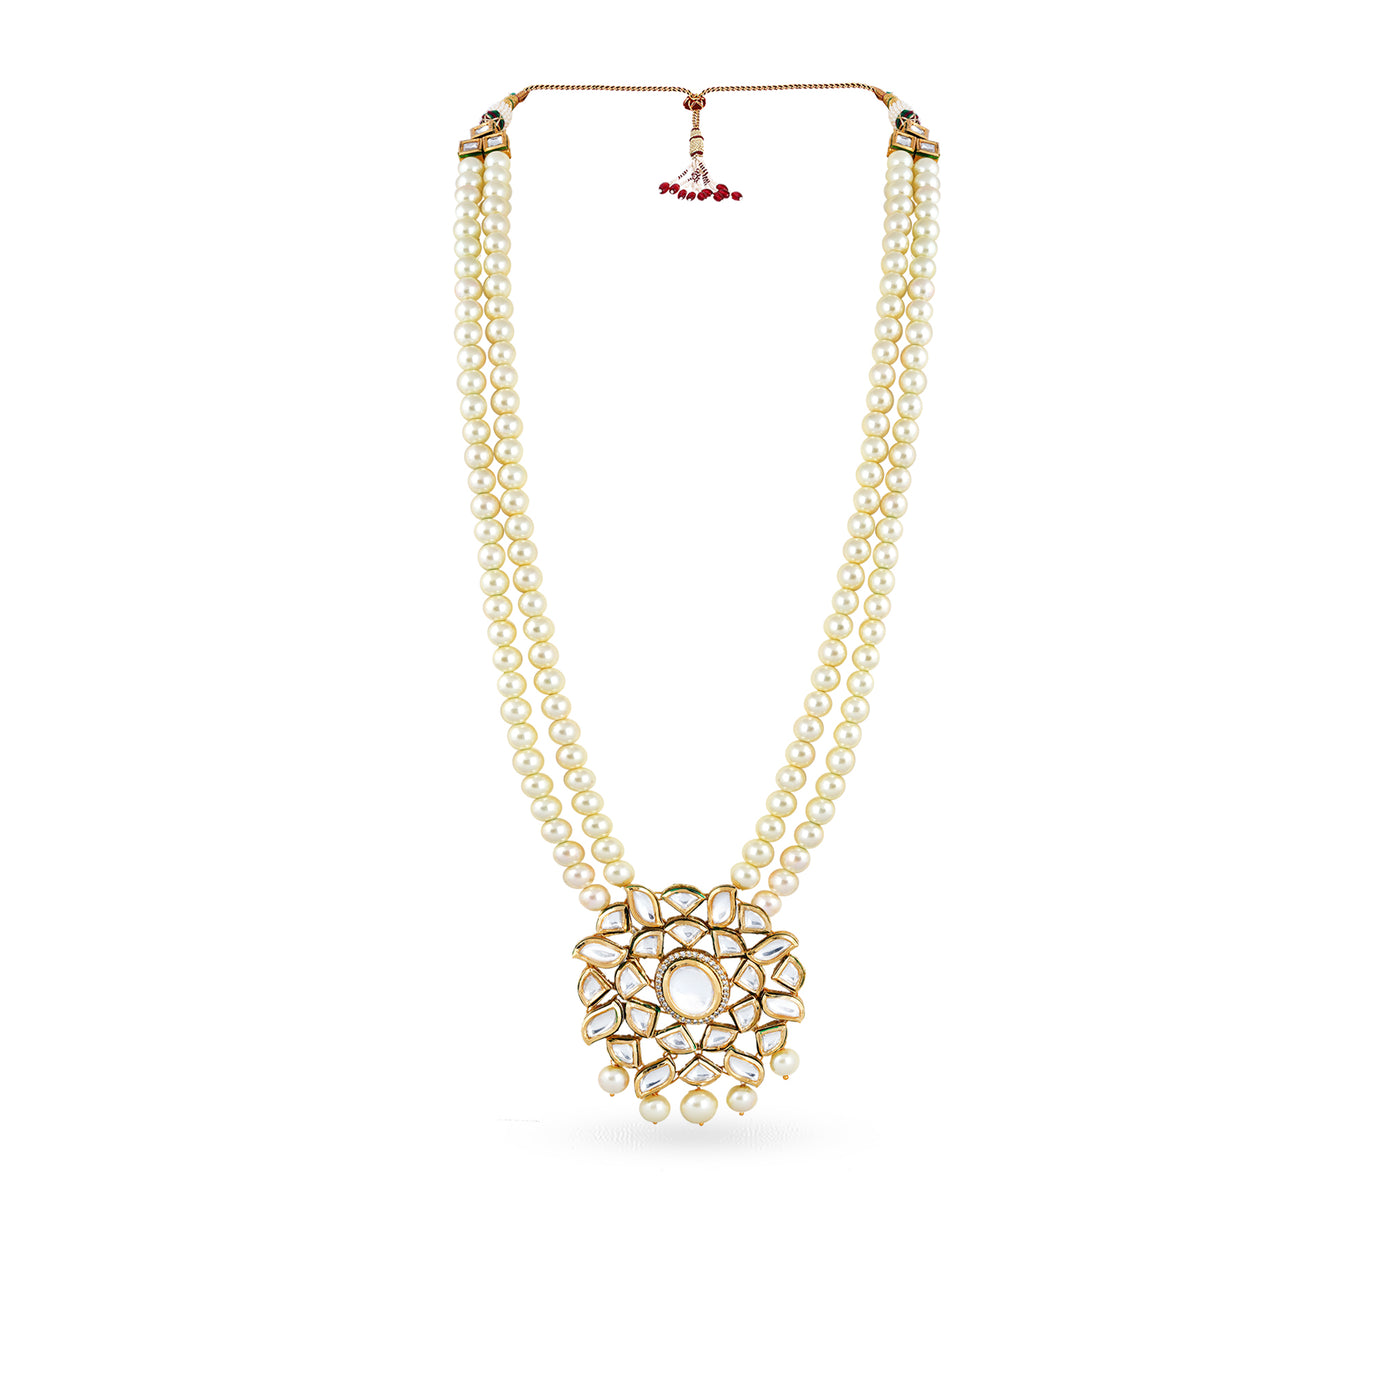 Gold plated long haar with faux pearls and kundan pendant.